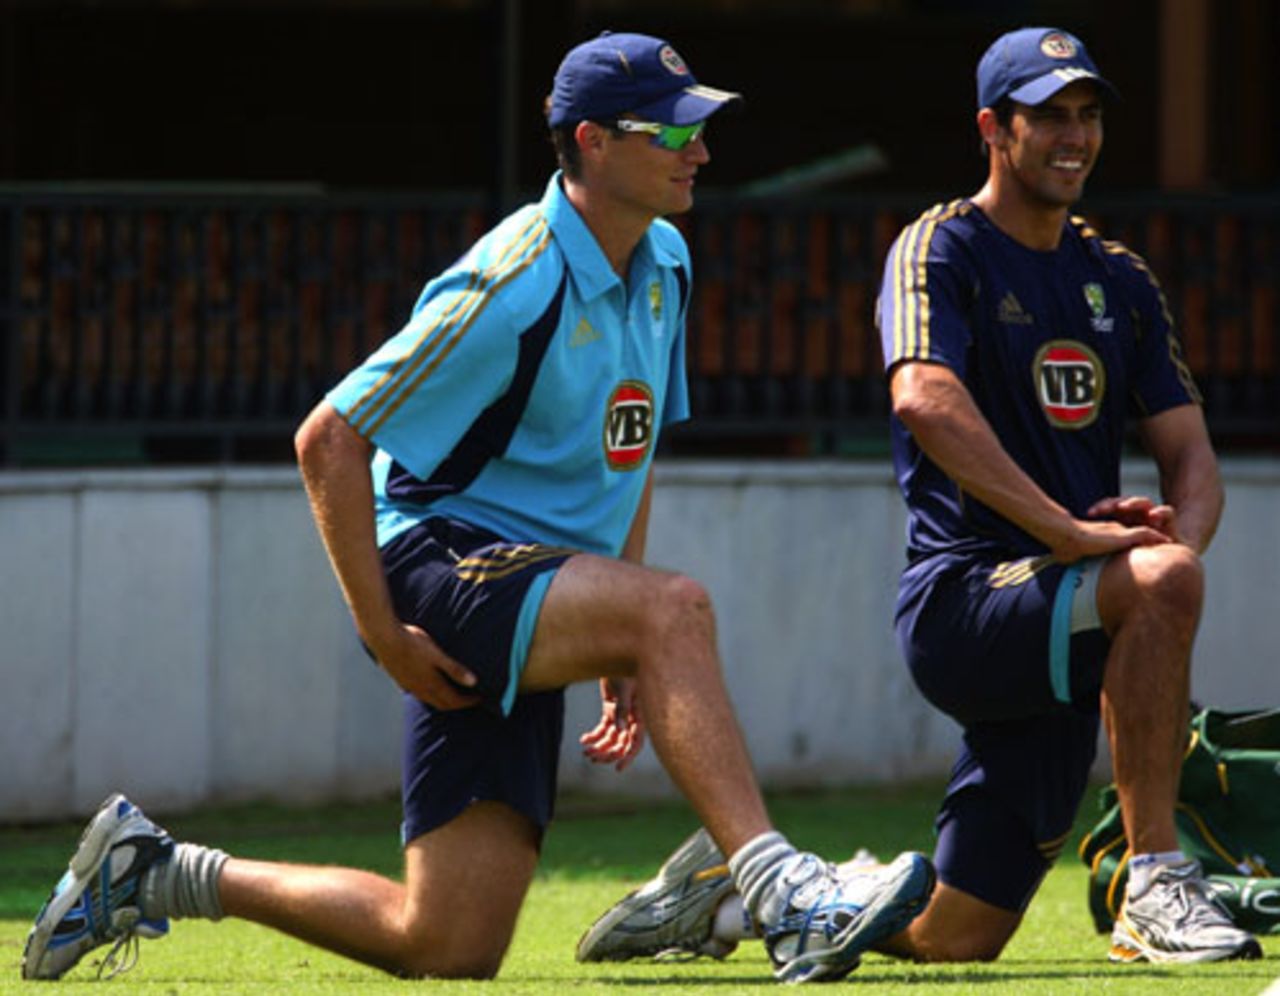 Stuart Clark and Mitchell Johnson stretch out, Mohali, October 15, 2008